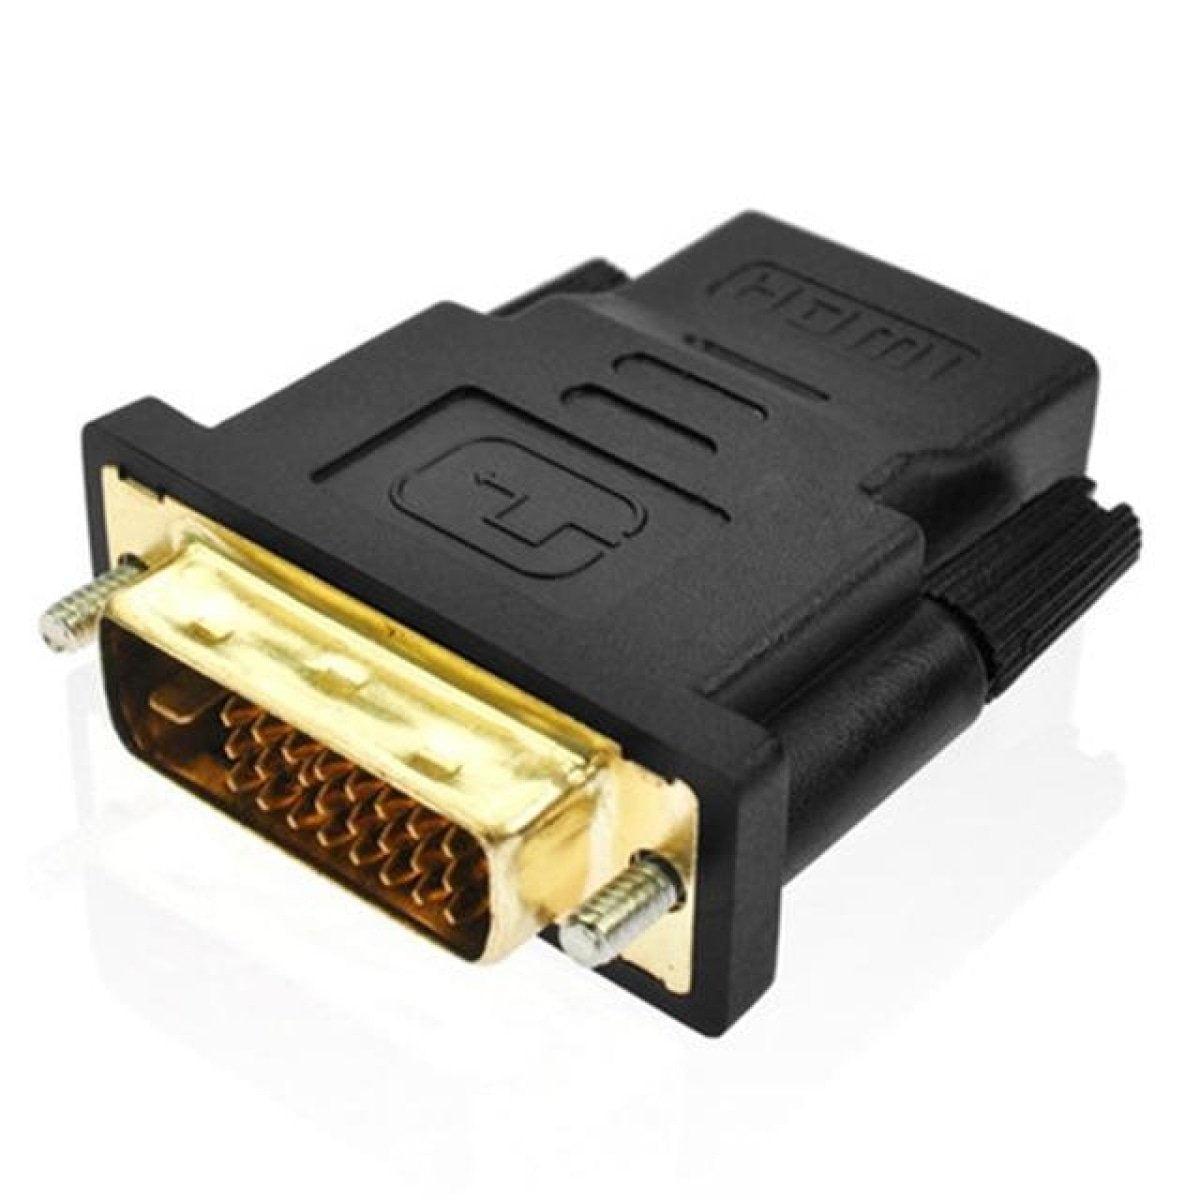 HDMI to DVI Cable 24+1 Pin Adaptor 4K Bi-Directional Male to HDMI Male Converter | 5m | Asia Sell